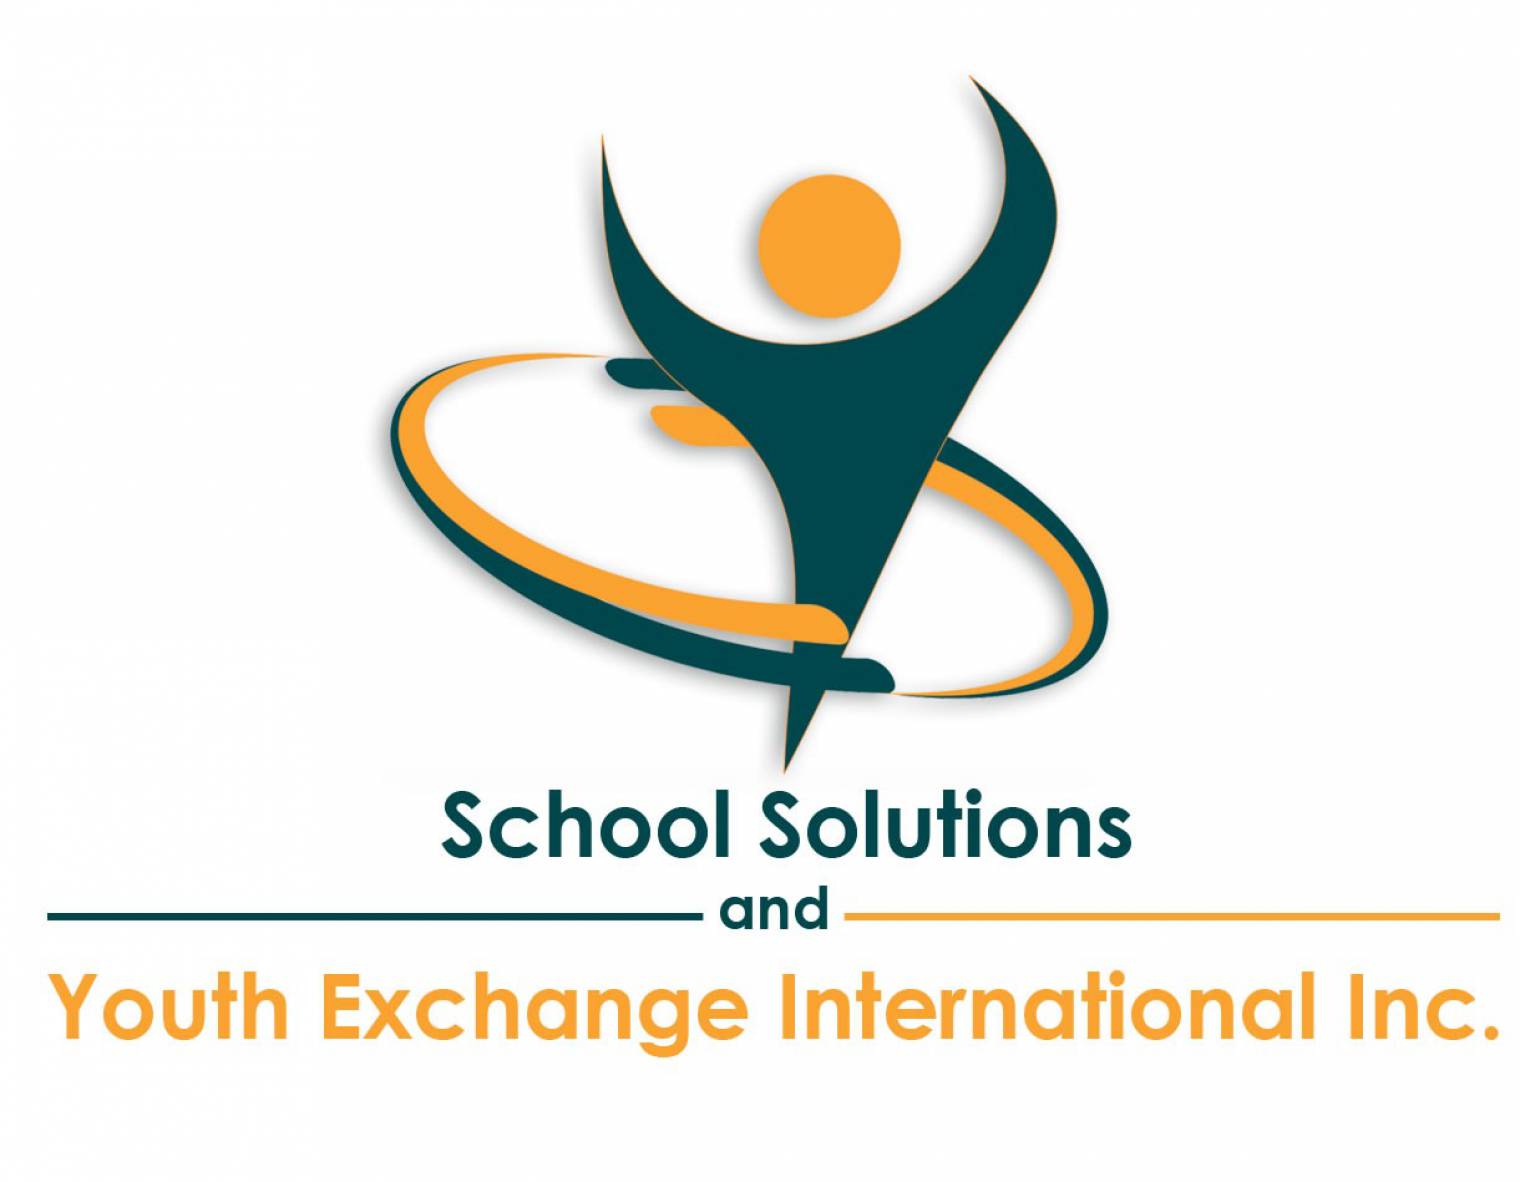 Welcome to School Solutions and Youth Exchange International from the Philippines as IAPA Affiliate member